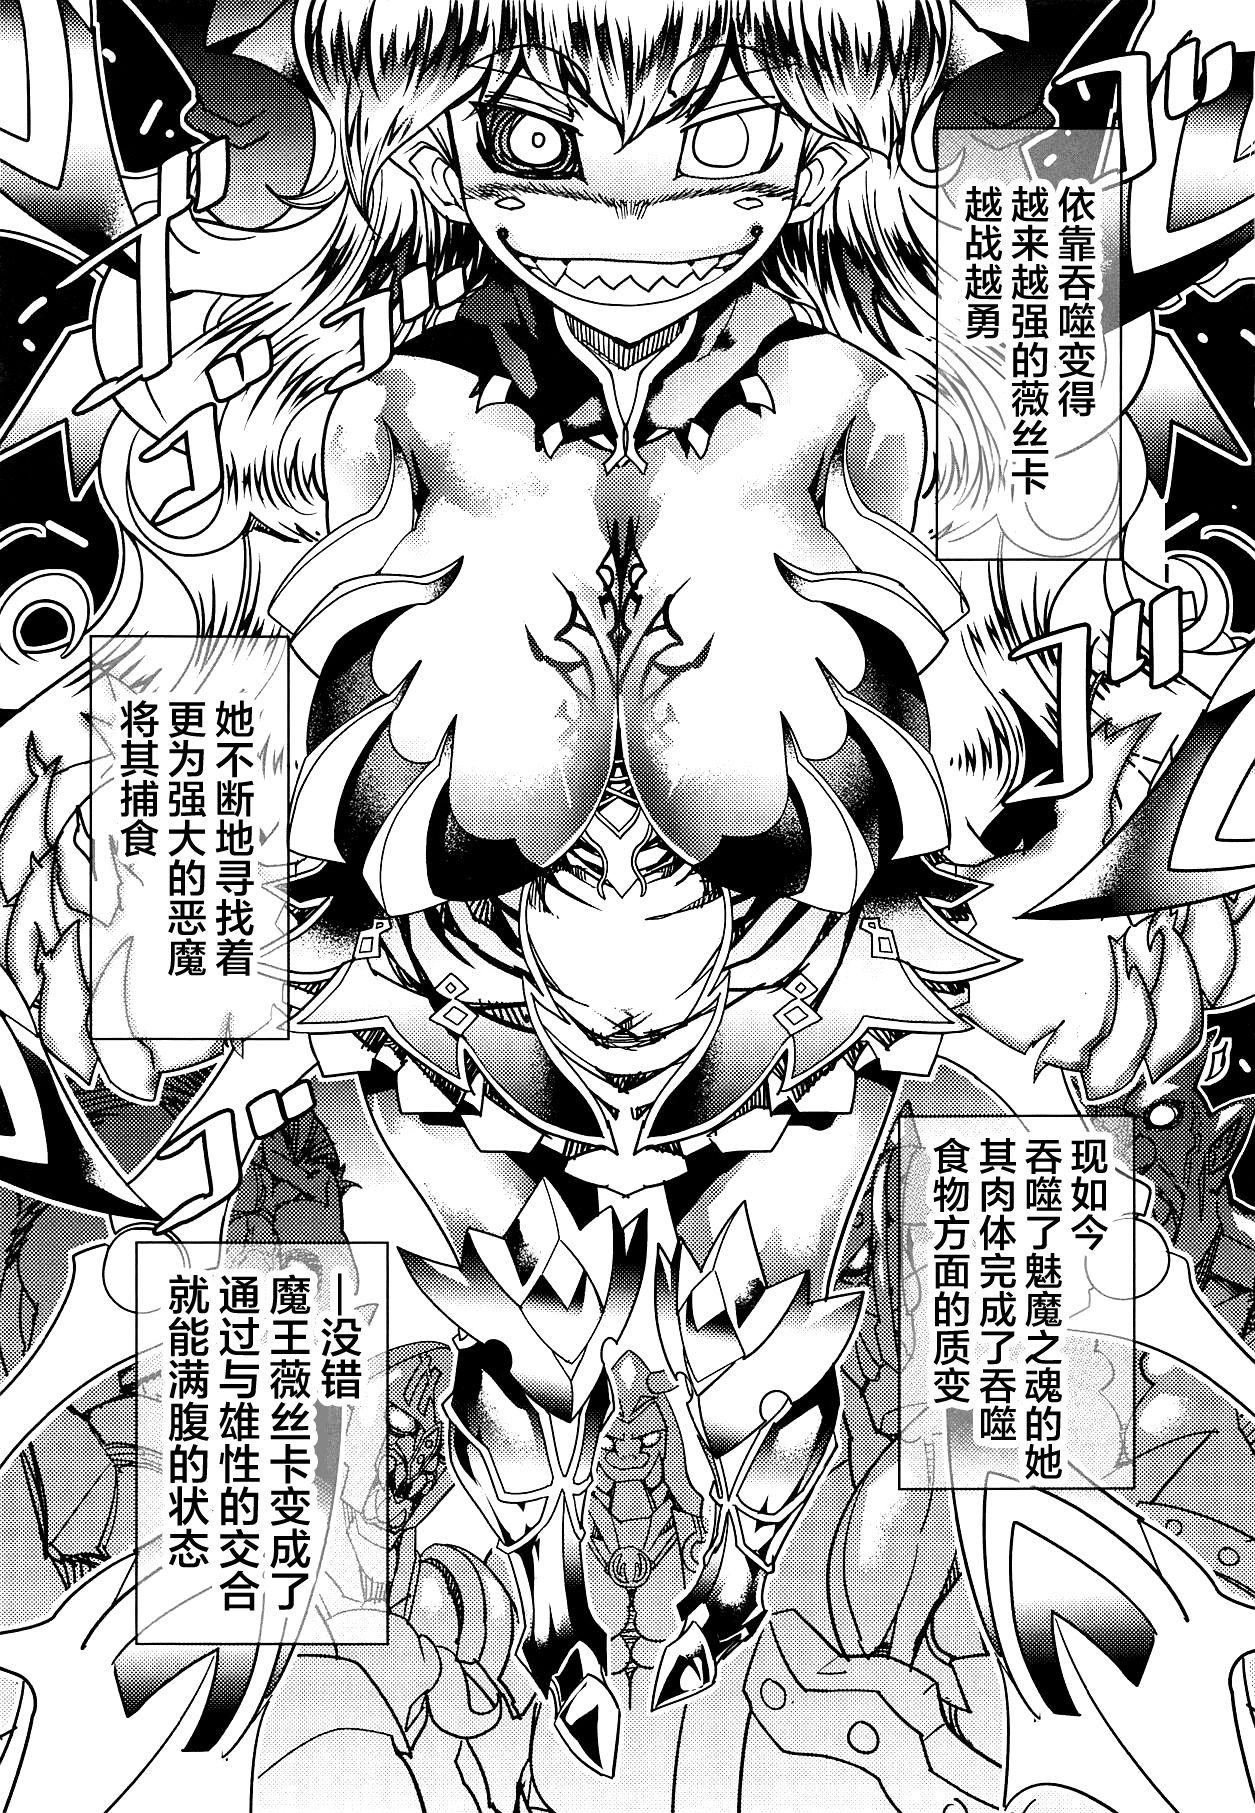 Load Queen Of Gluttony - Kings raid Long Hair - Page 3